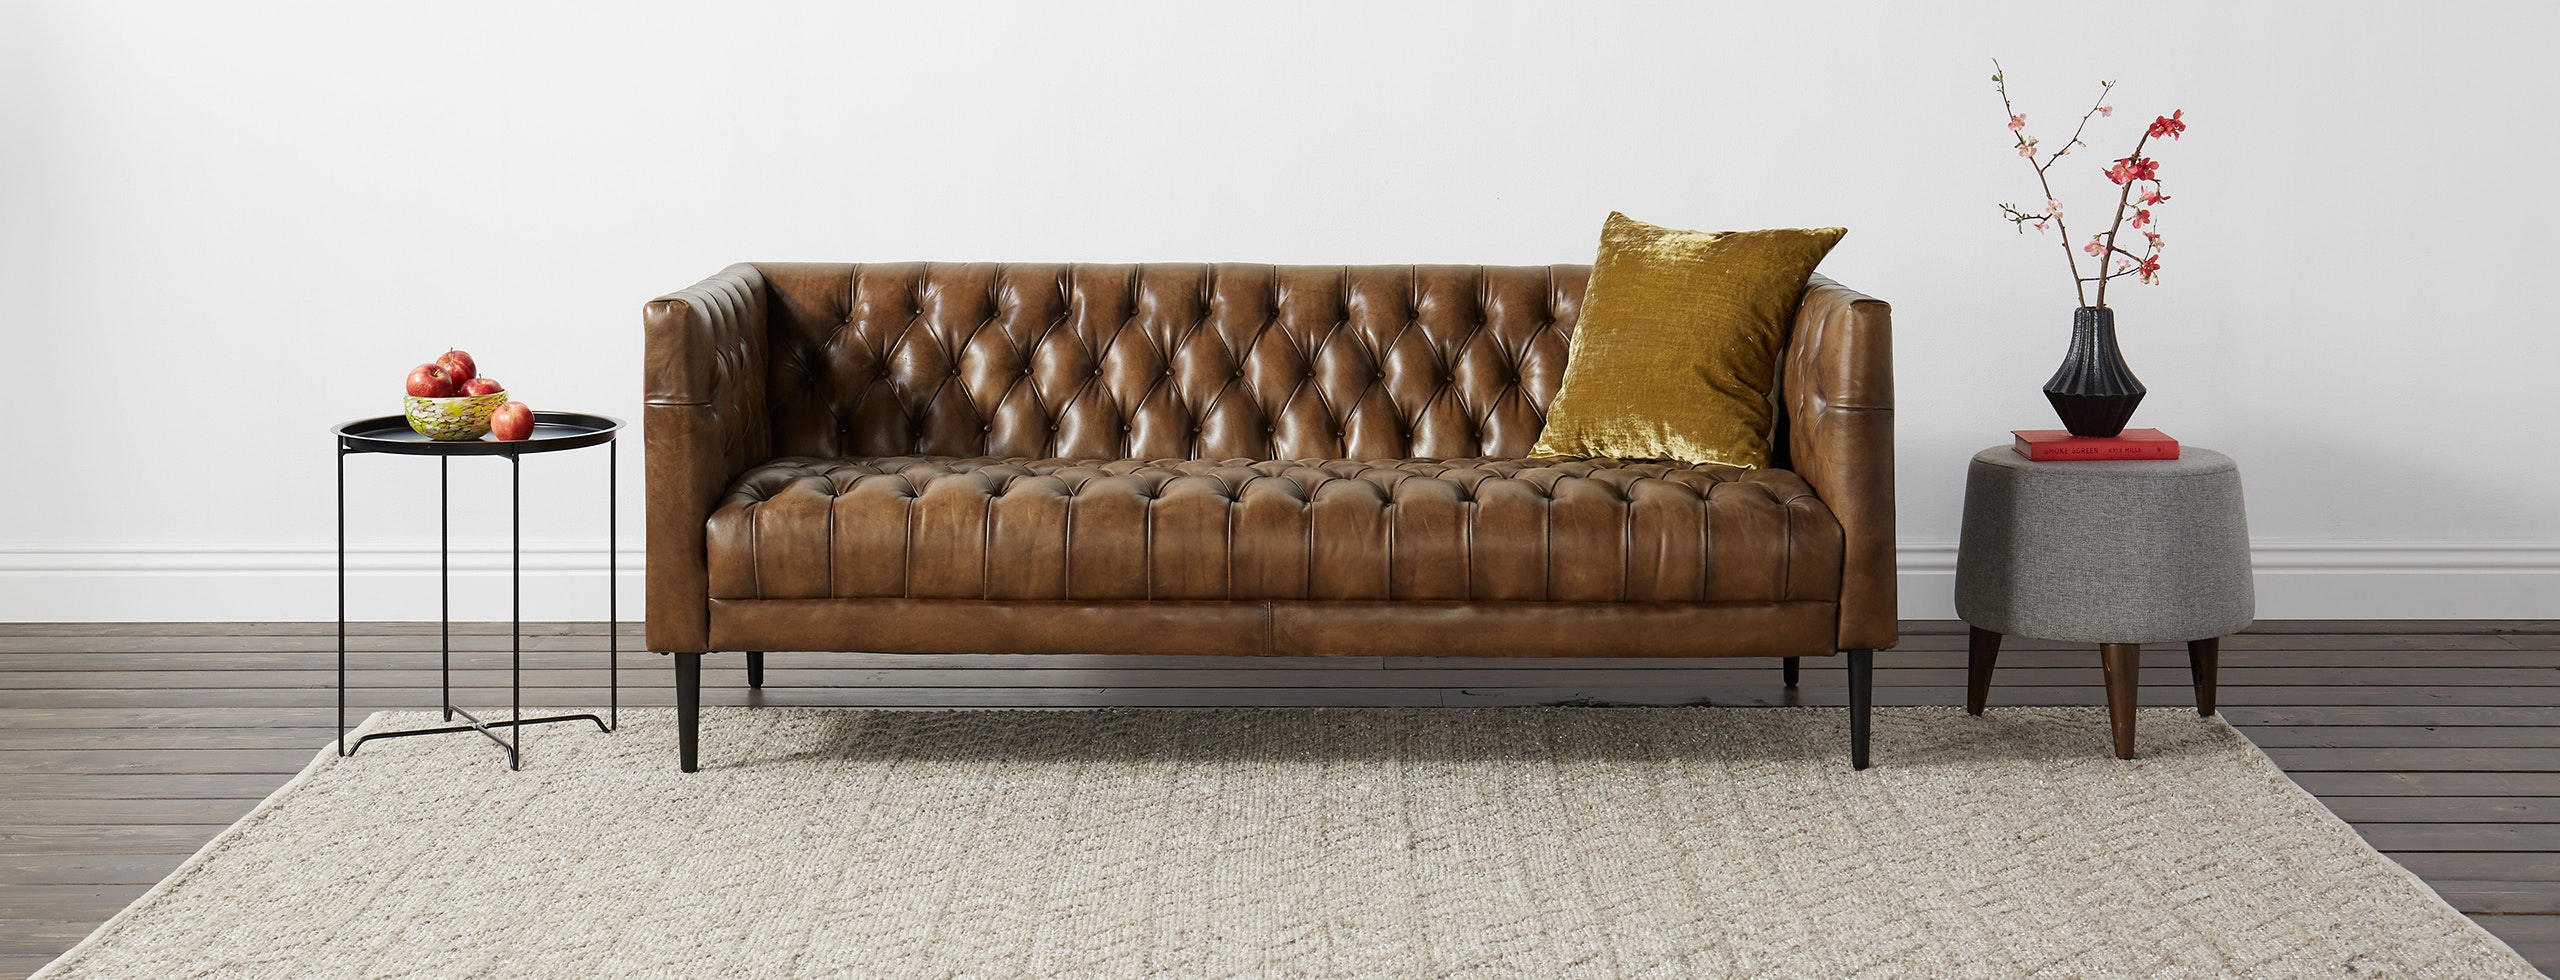 76 in leather sofa